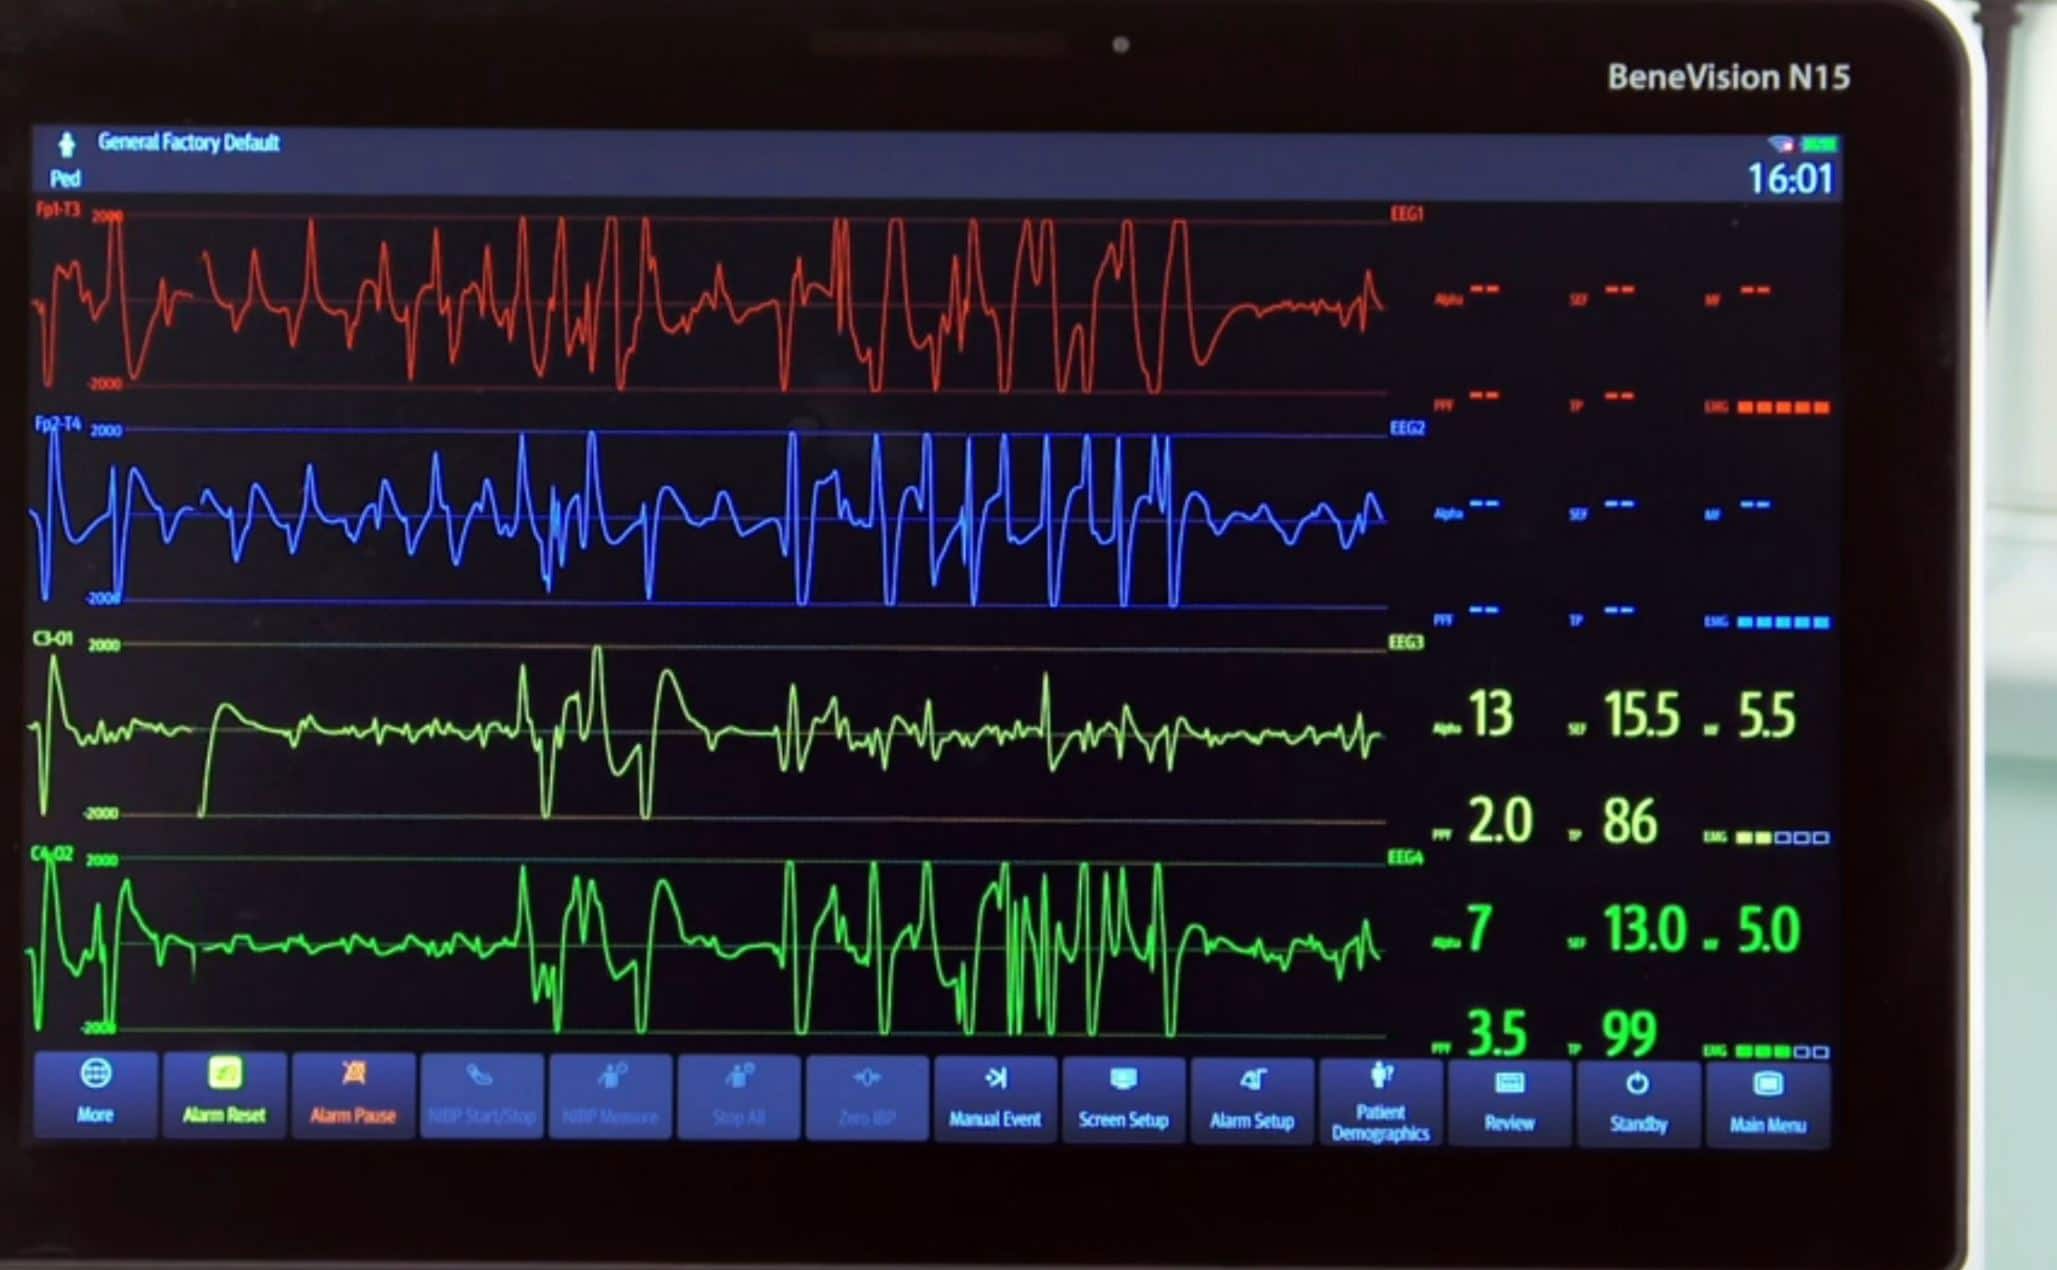 electroencephalogram waveforms in a children’s show